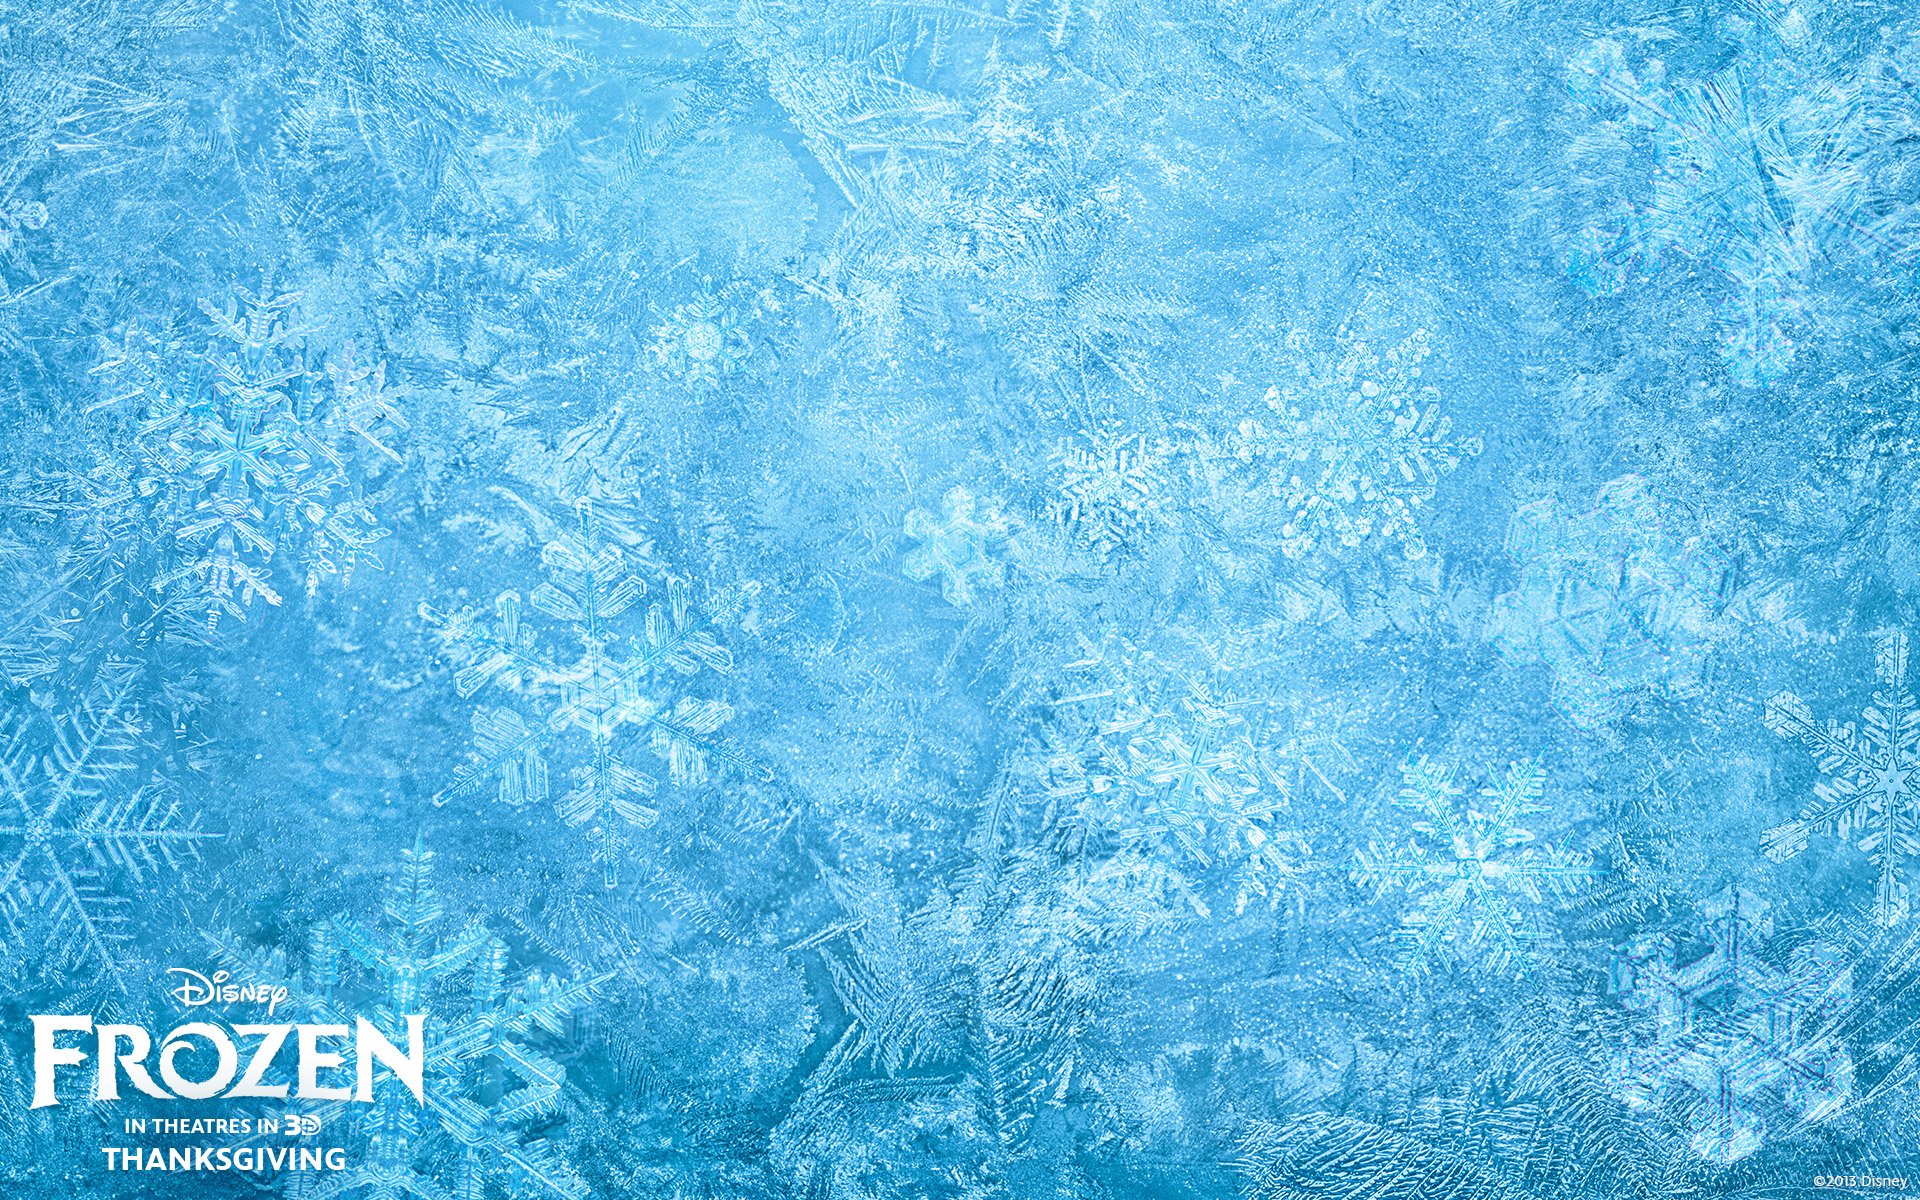  Disneys Frozen CG animated movie wallpaper image background picture 1920x1200